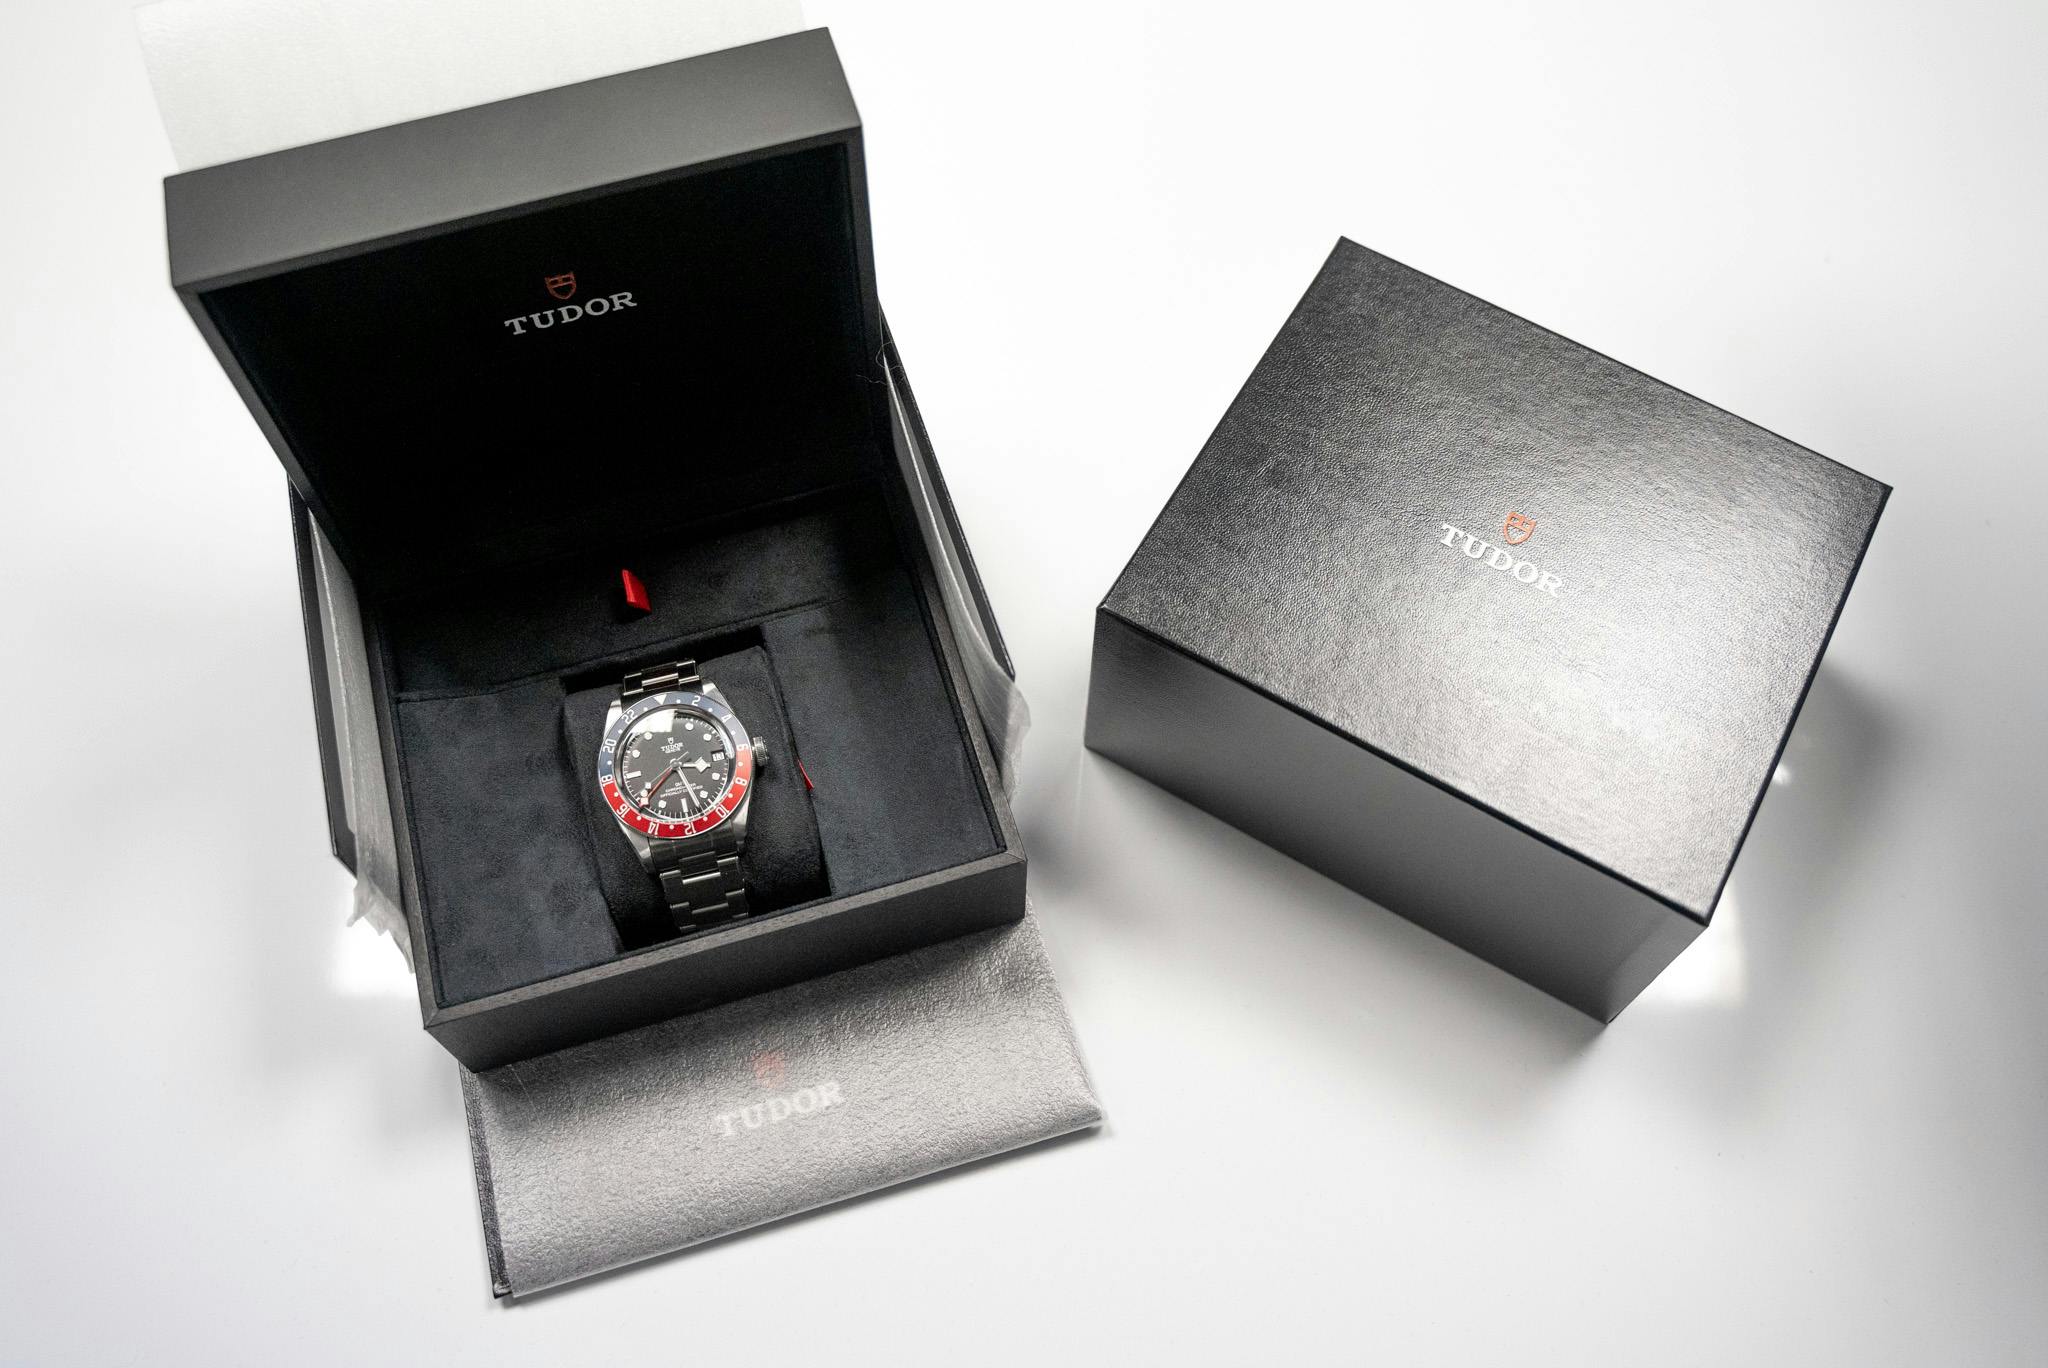 2022 TUDOR BLACK BAY GMT for sale by auction in Leeds, West Yorkshire ...